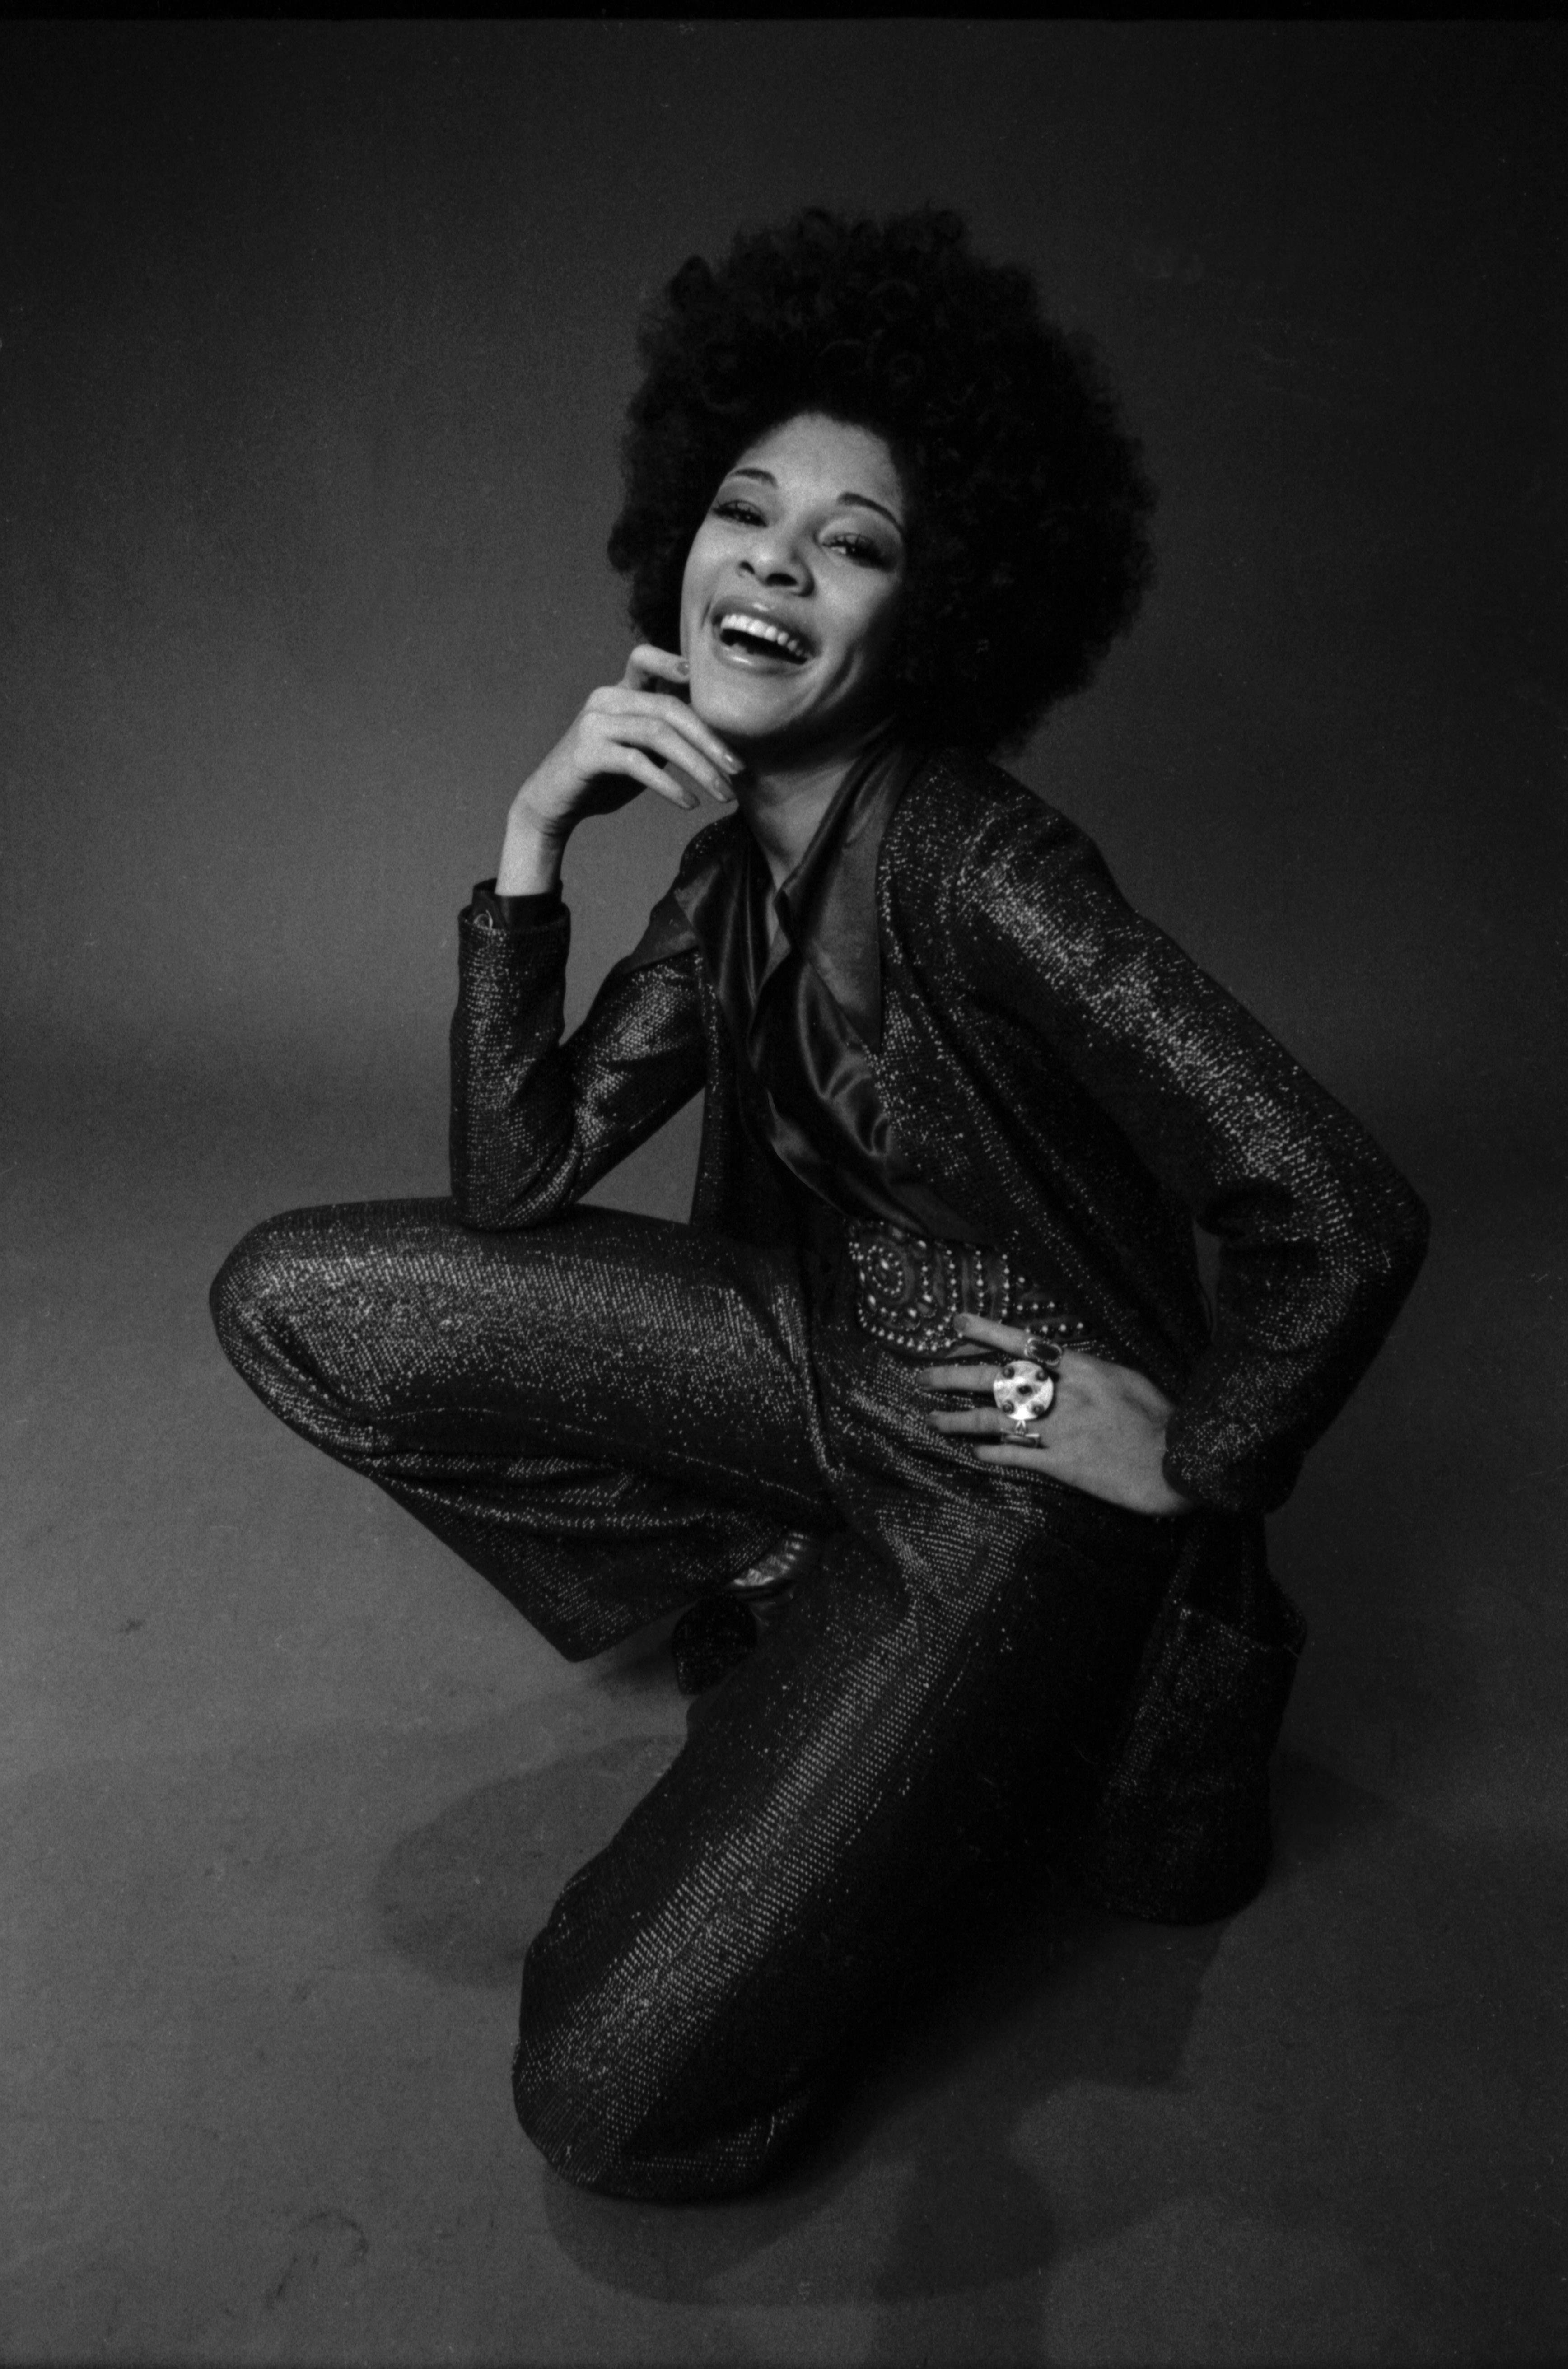 Betty Davis - Betty Davis was a free woman on the stage, paying little attention to the misogyny of the early '70s music scene.(Photo: Anthony Barboza/Getty Images)